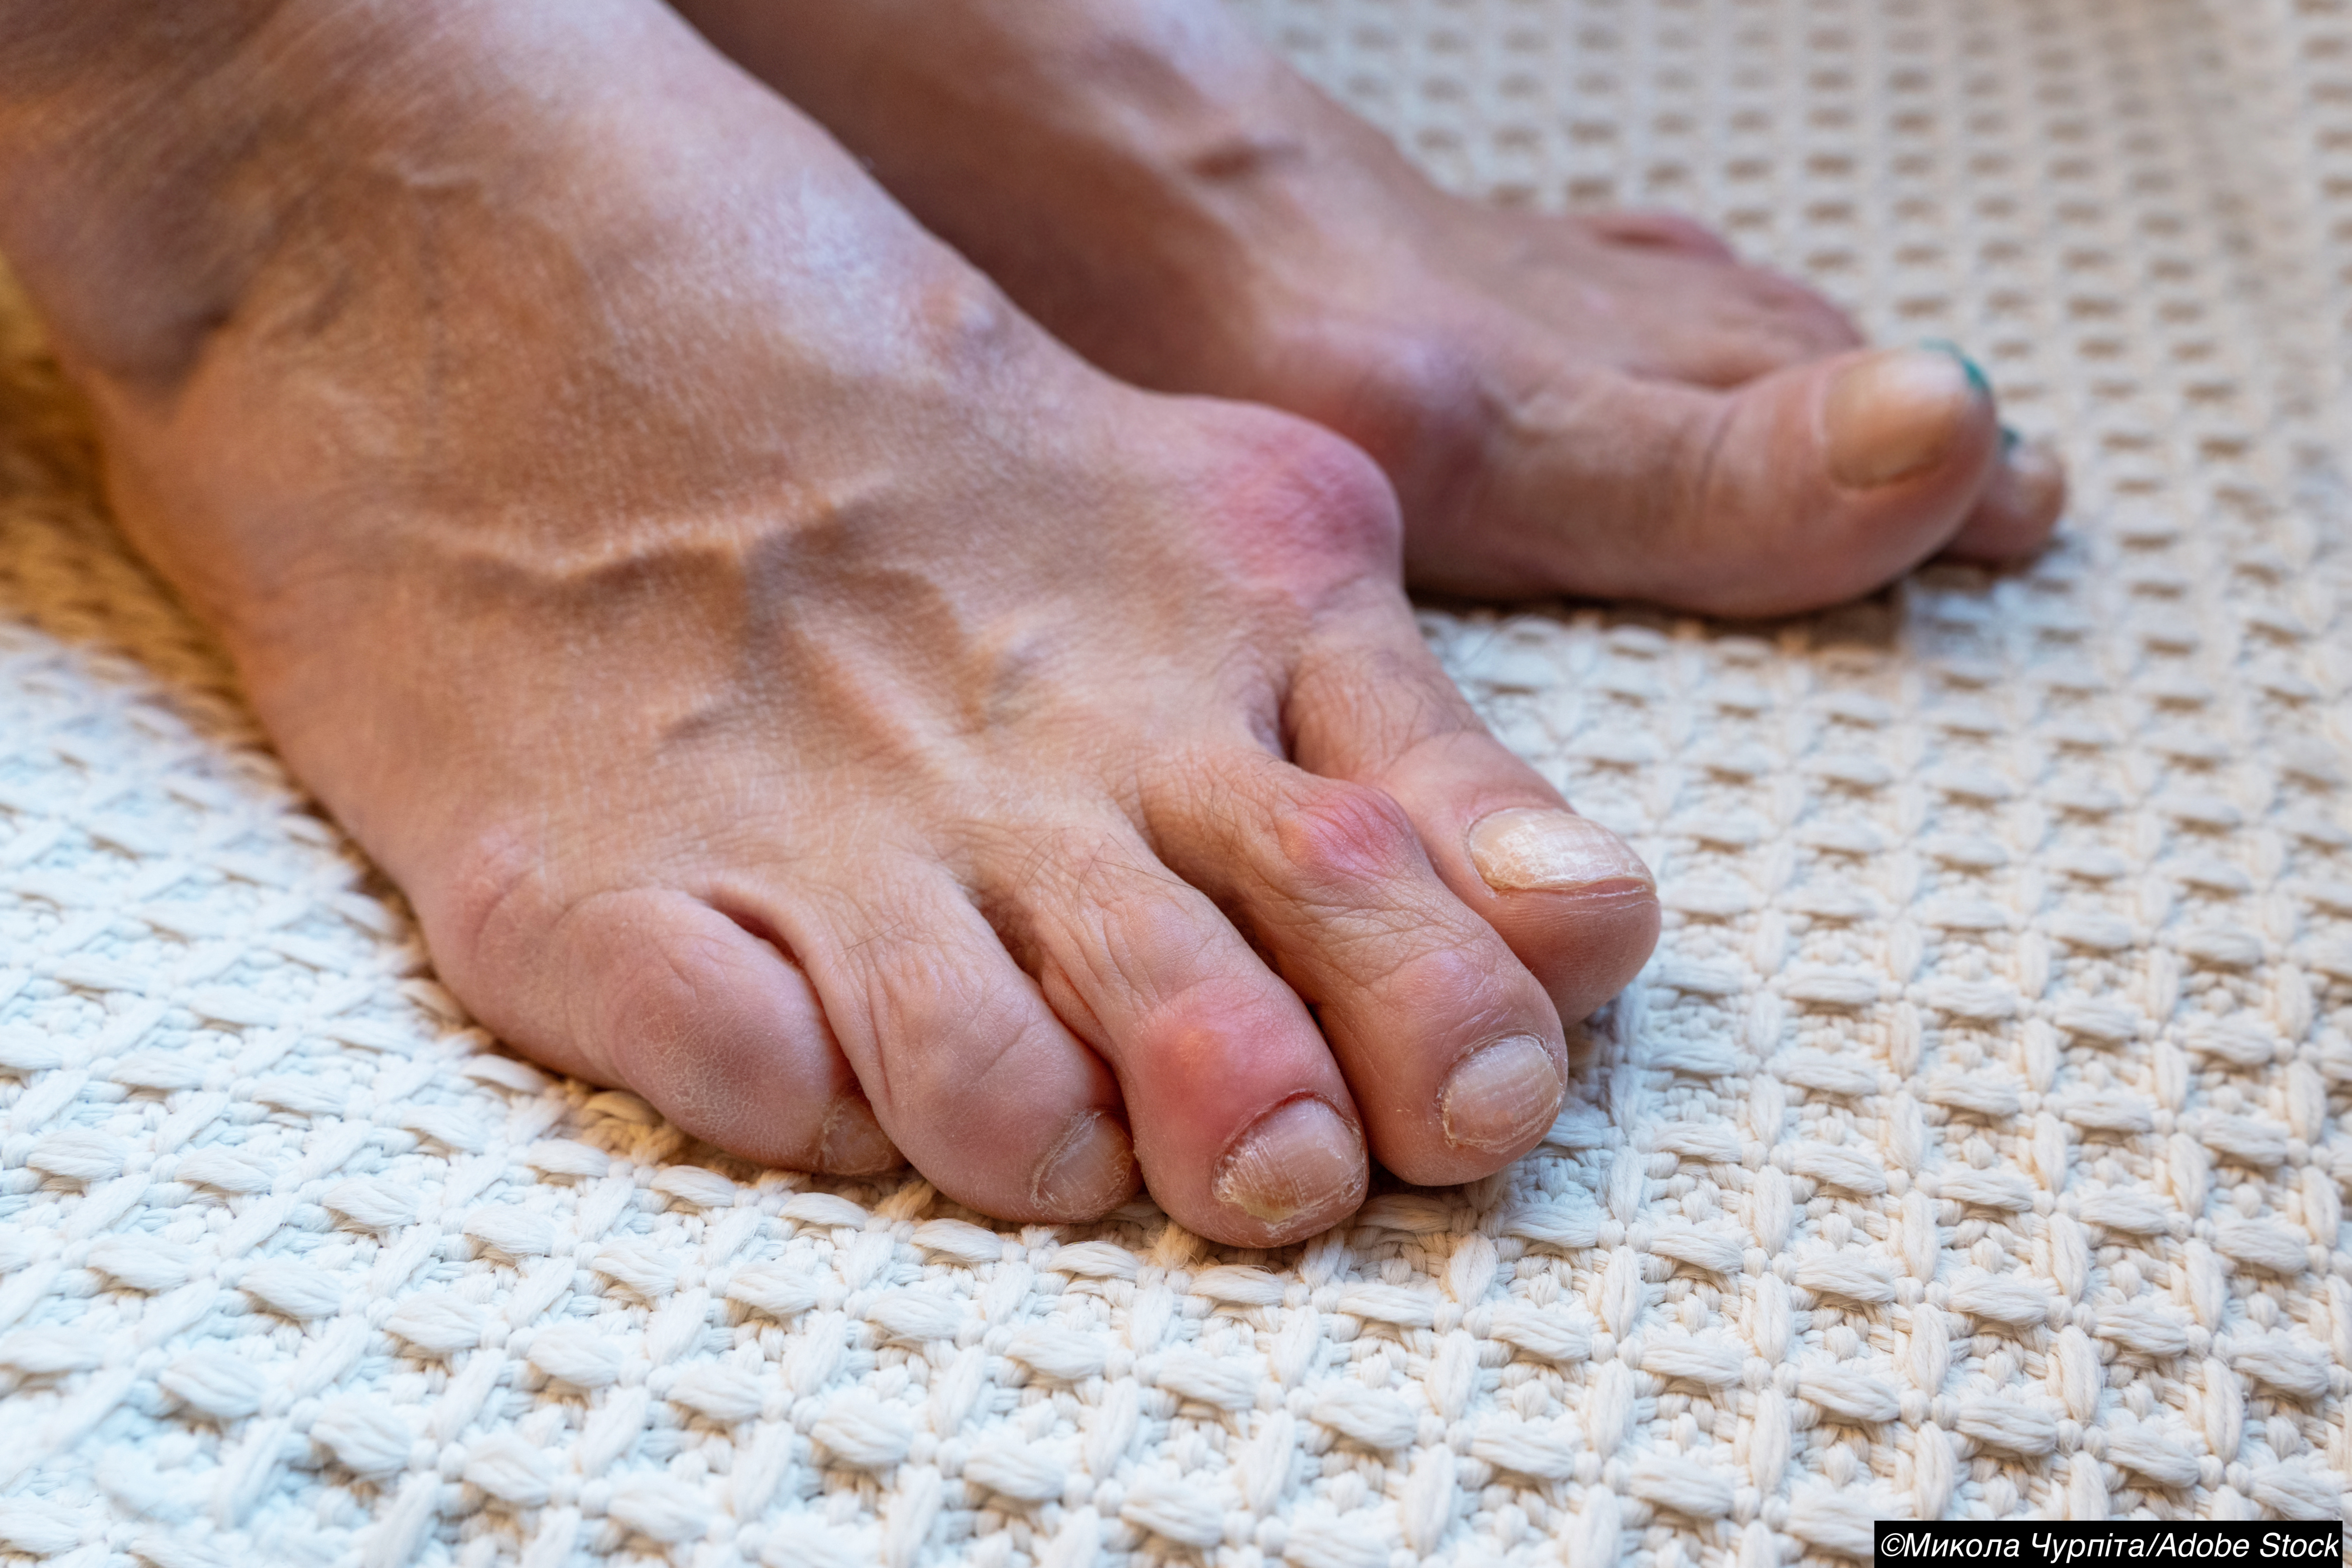 VA Study: Gout Ups Risk for Lower Extremity Amputation by 20%